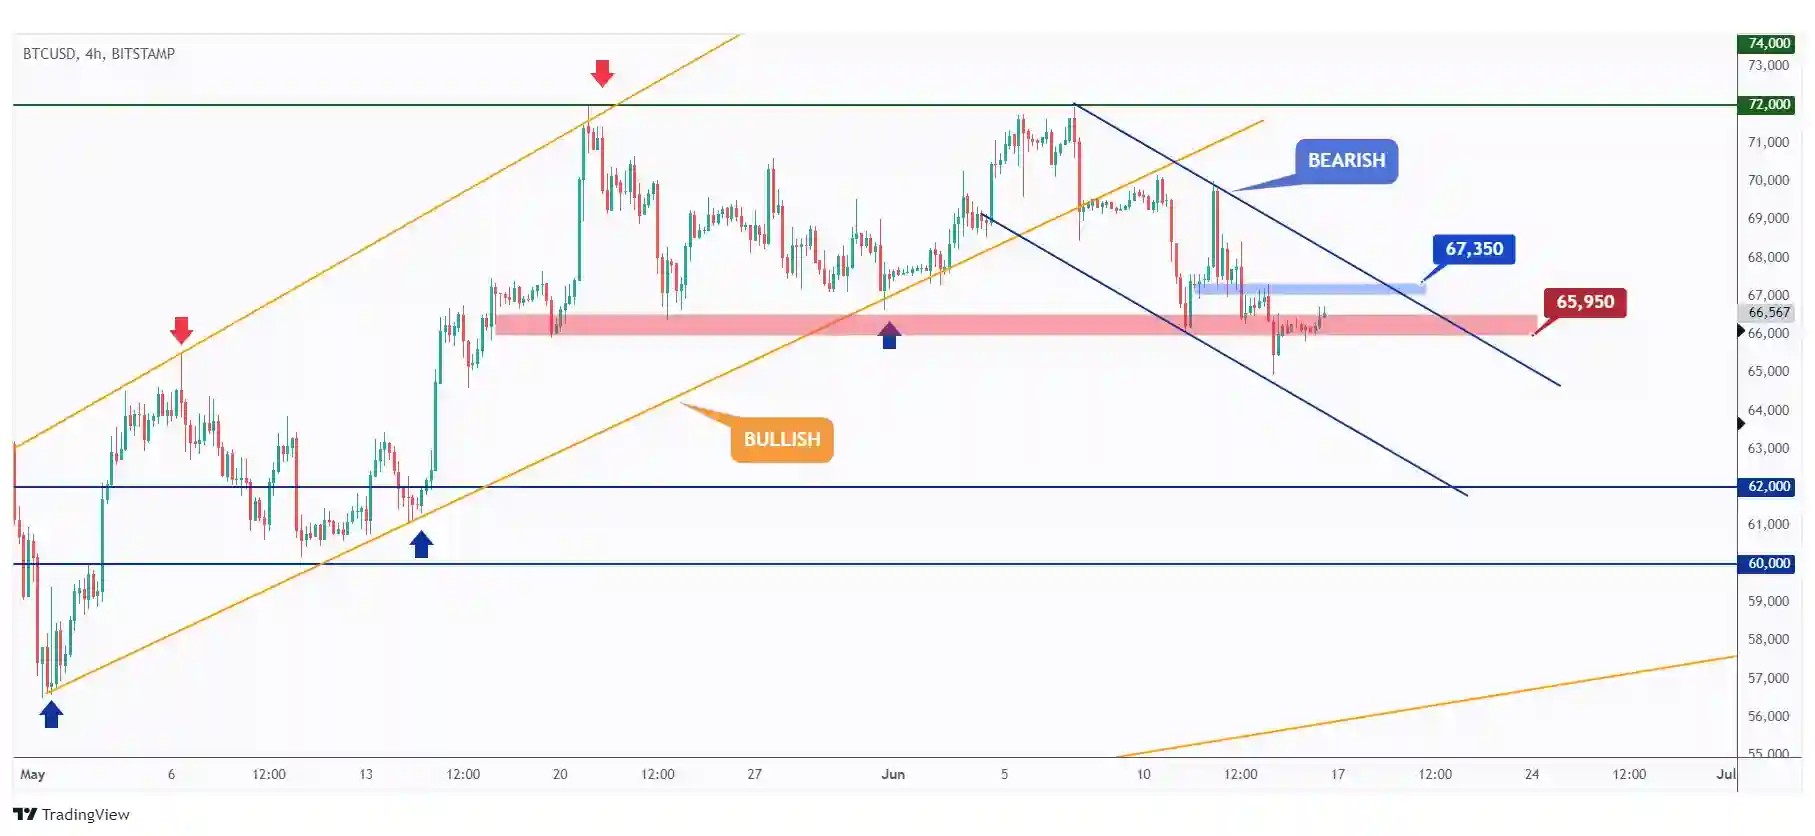 BTC 4h chart overall bearish trading within the falling channel.